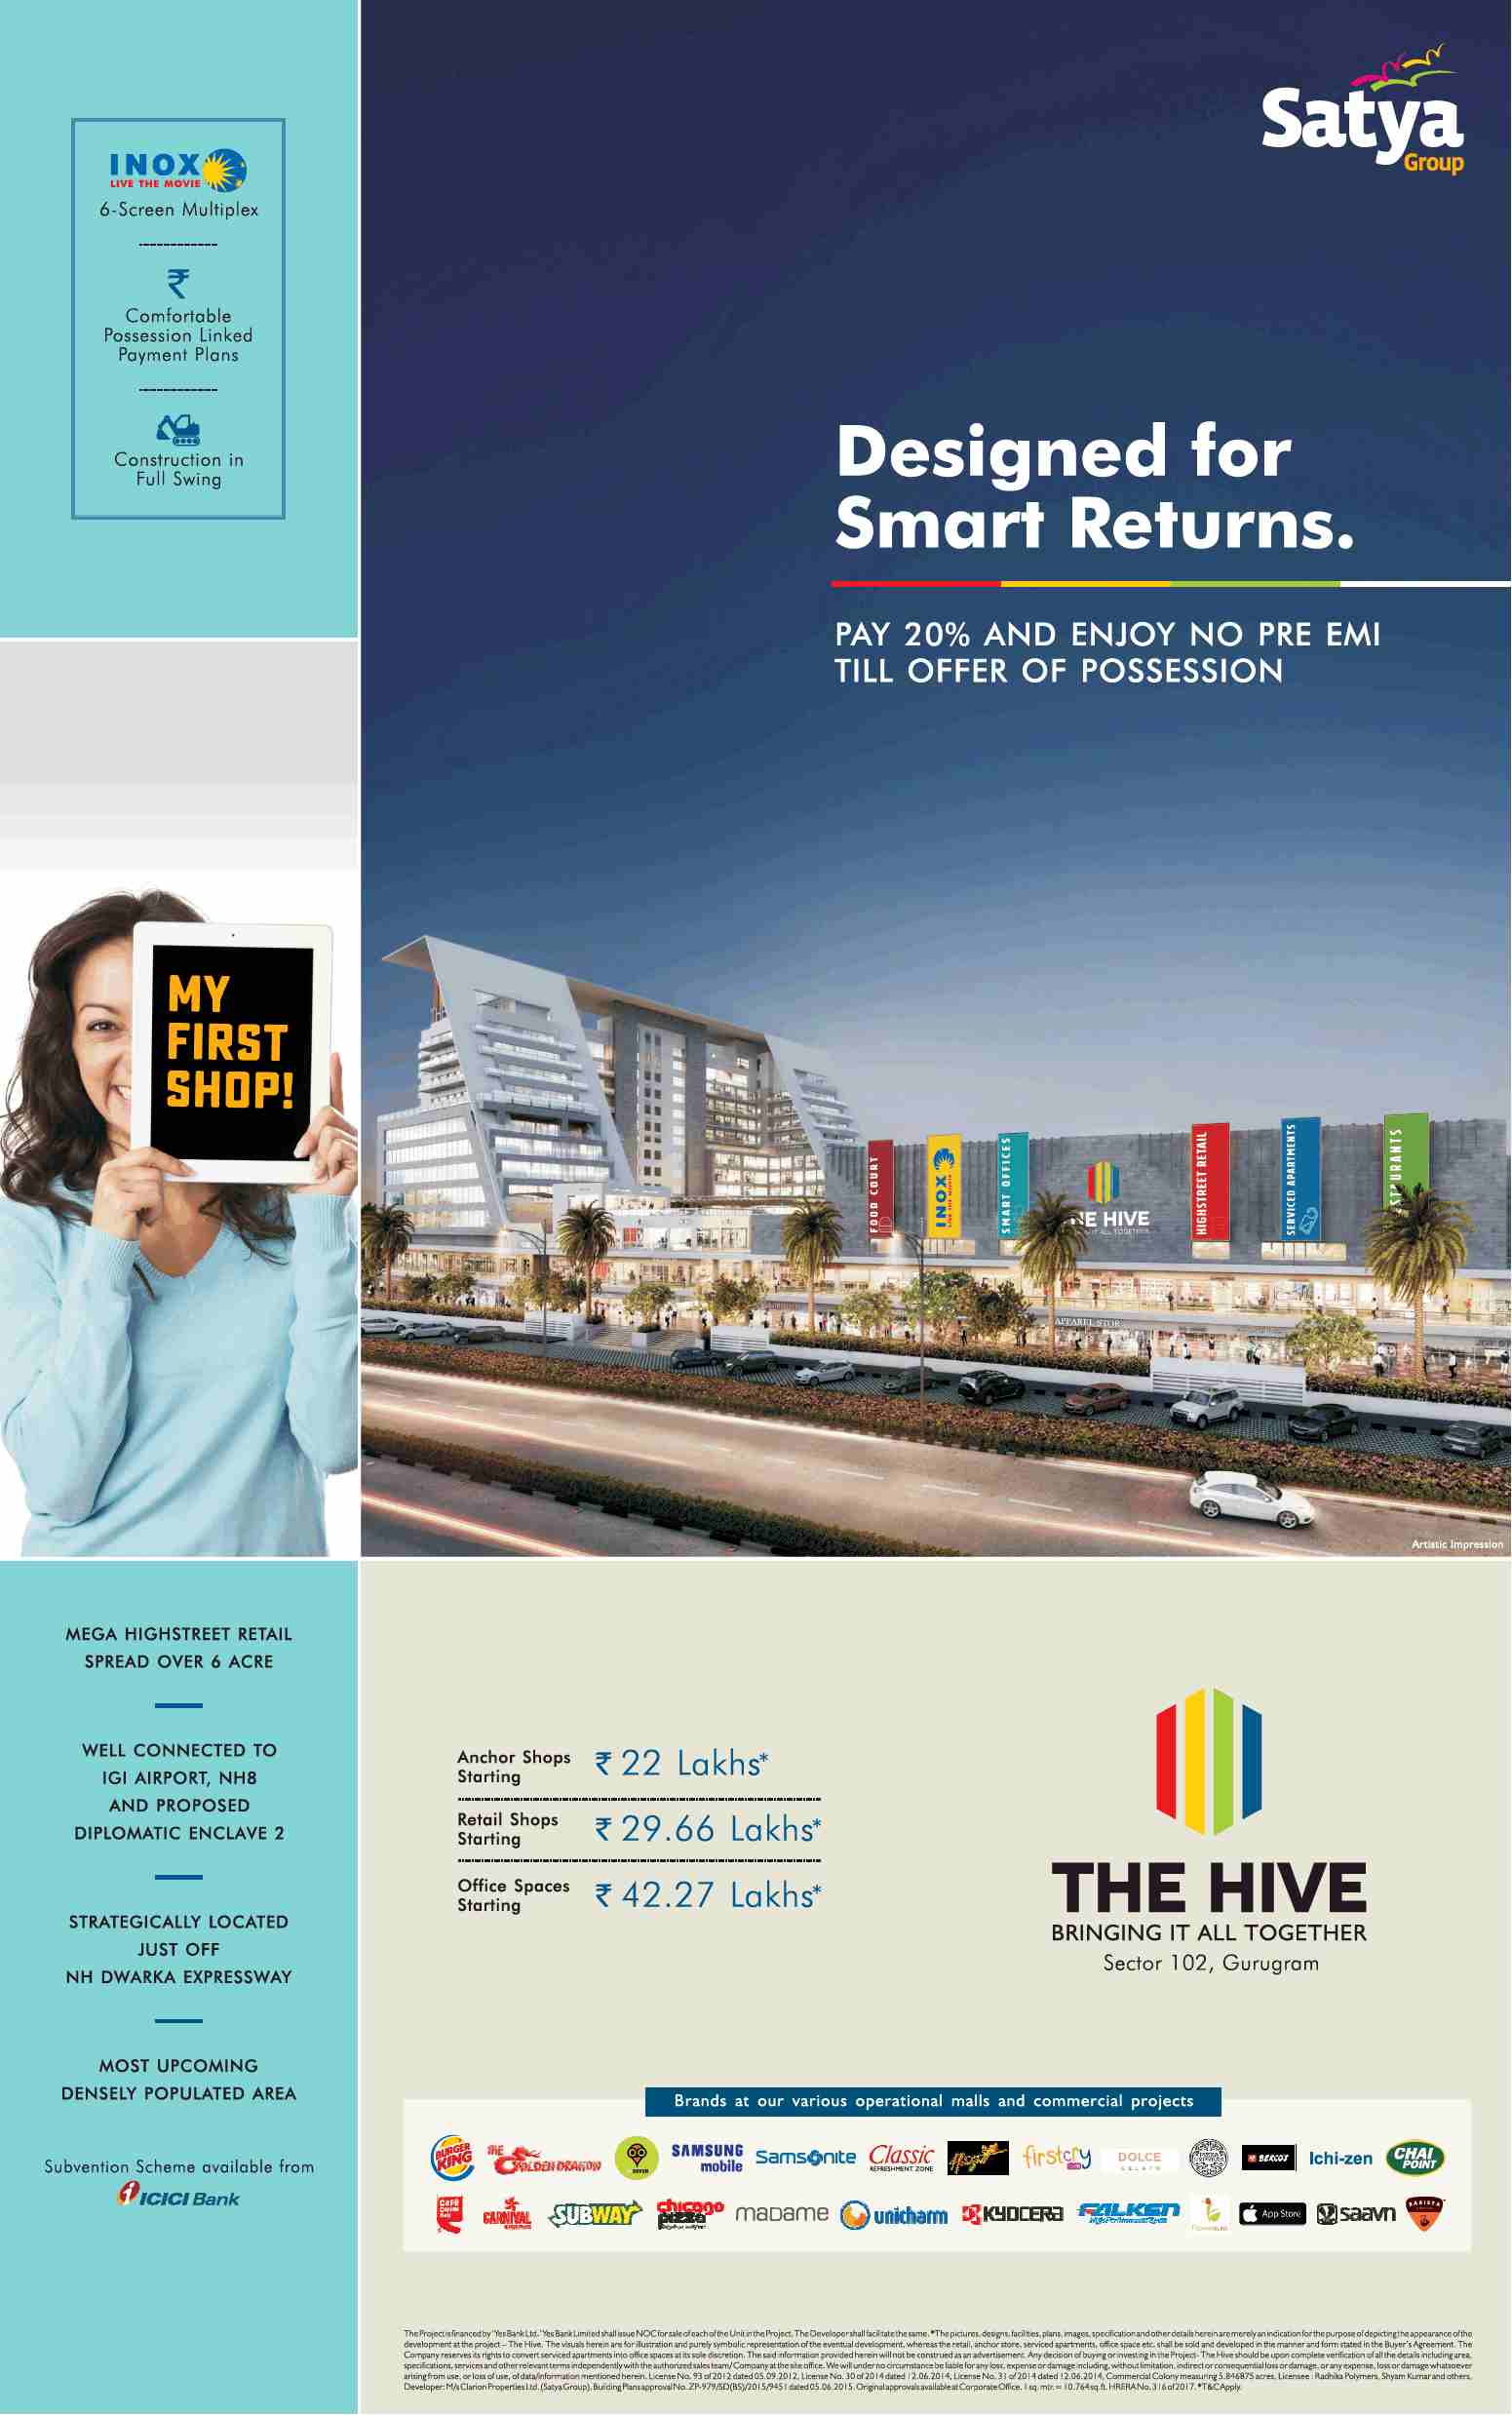 Pay 20% and enjoy no pre-EMI till offer of possession at Satya The Hive in Gurgaon